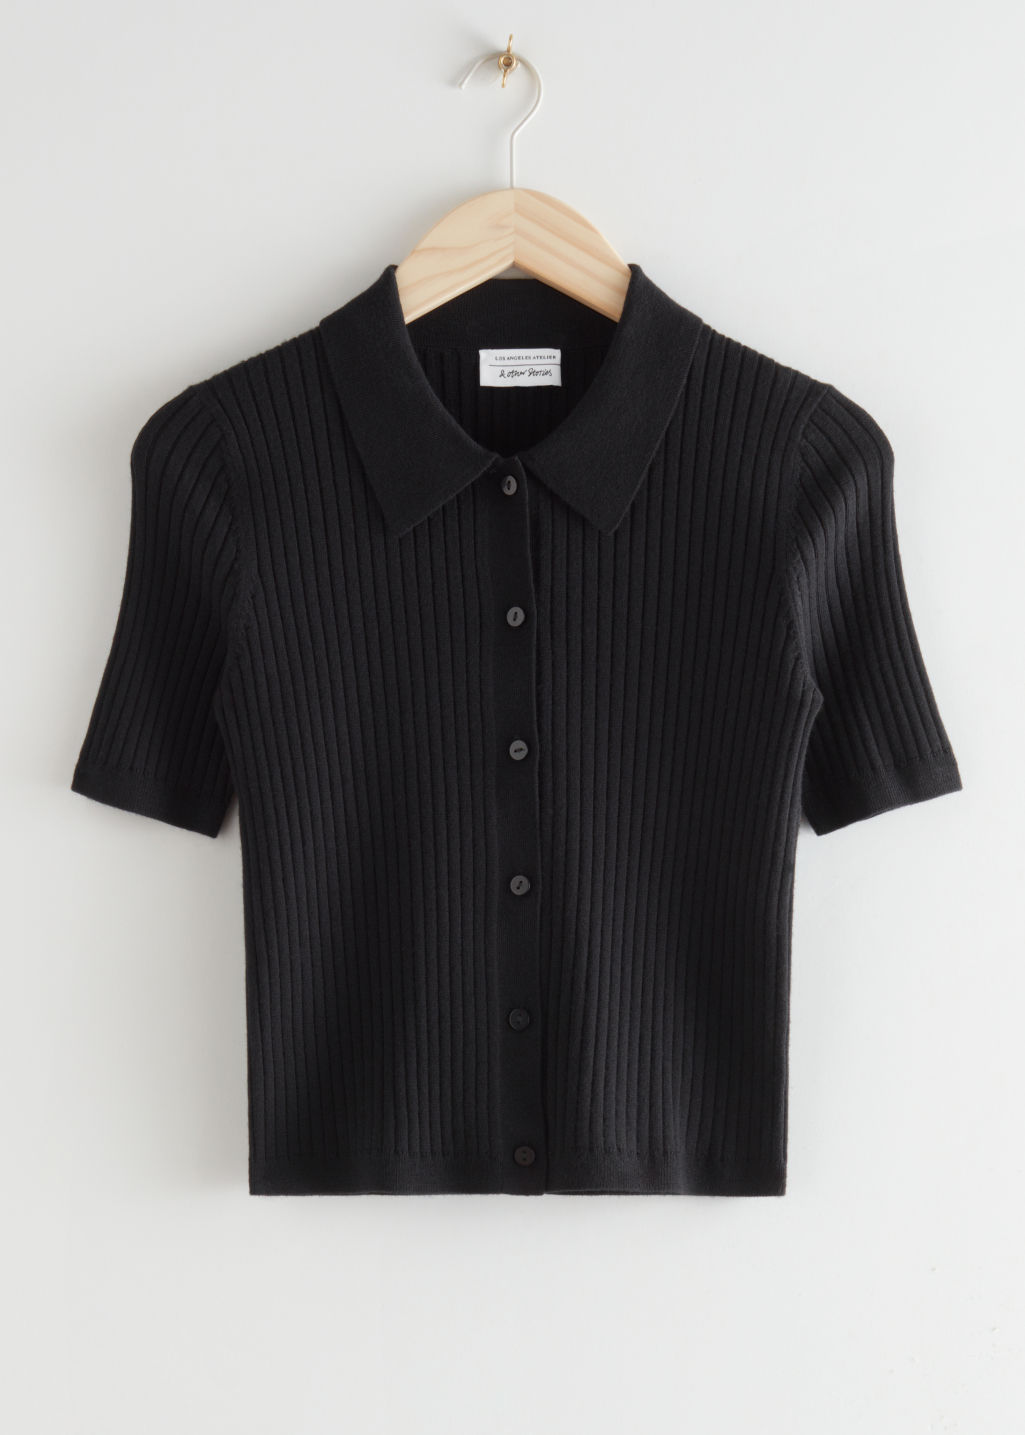 Fitted Button Up Knit Top - Black - Tops & T-shirts - & Other Stories